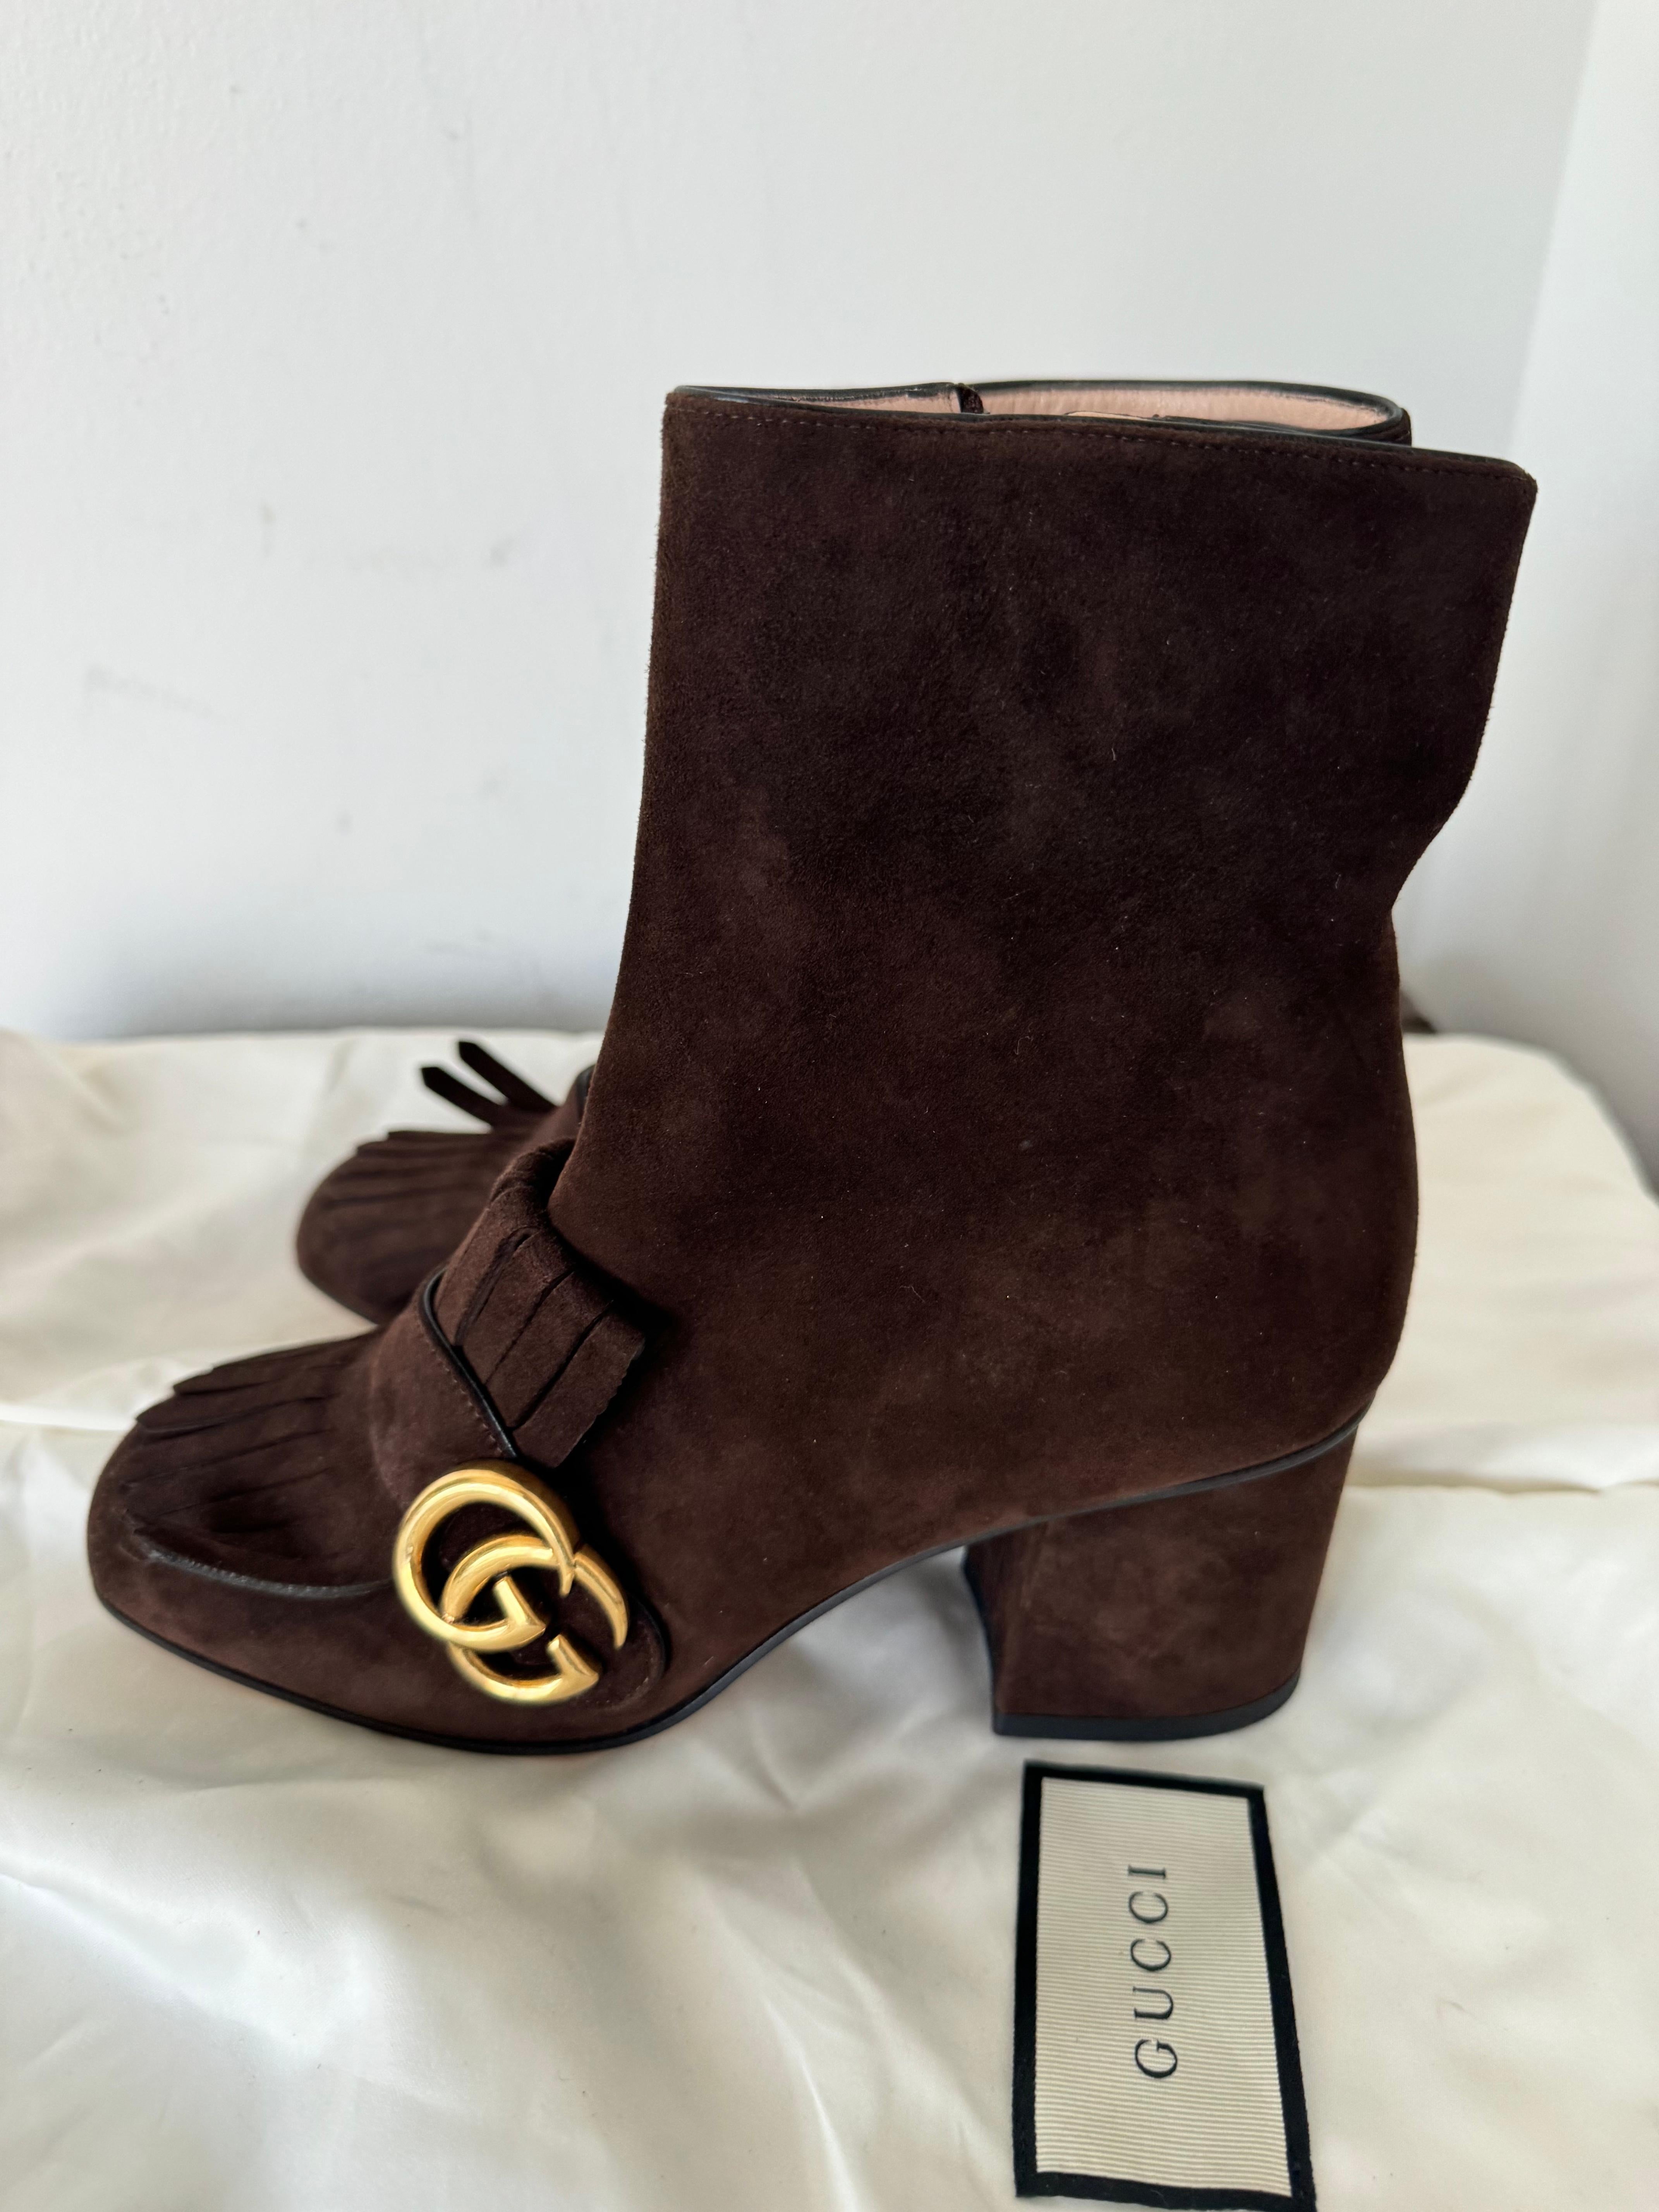 The brand new brown suede Gucci ankle boots you've described are a beautiful blend of sophistication, luxury, and signature Gucci detailing.

Material and Color:
Crafted from rich brown suede, these ankle boots exude elegance and timeless style.